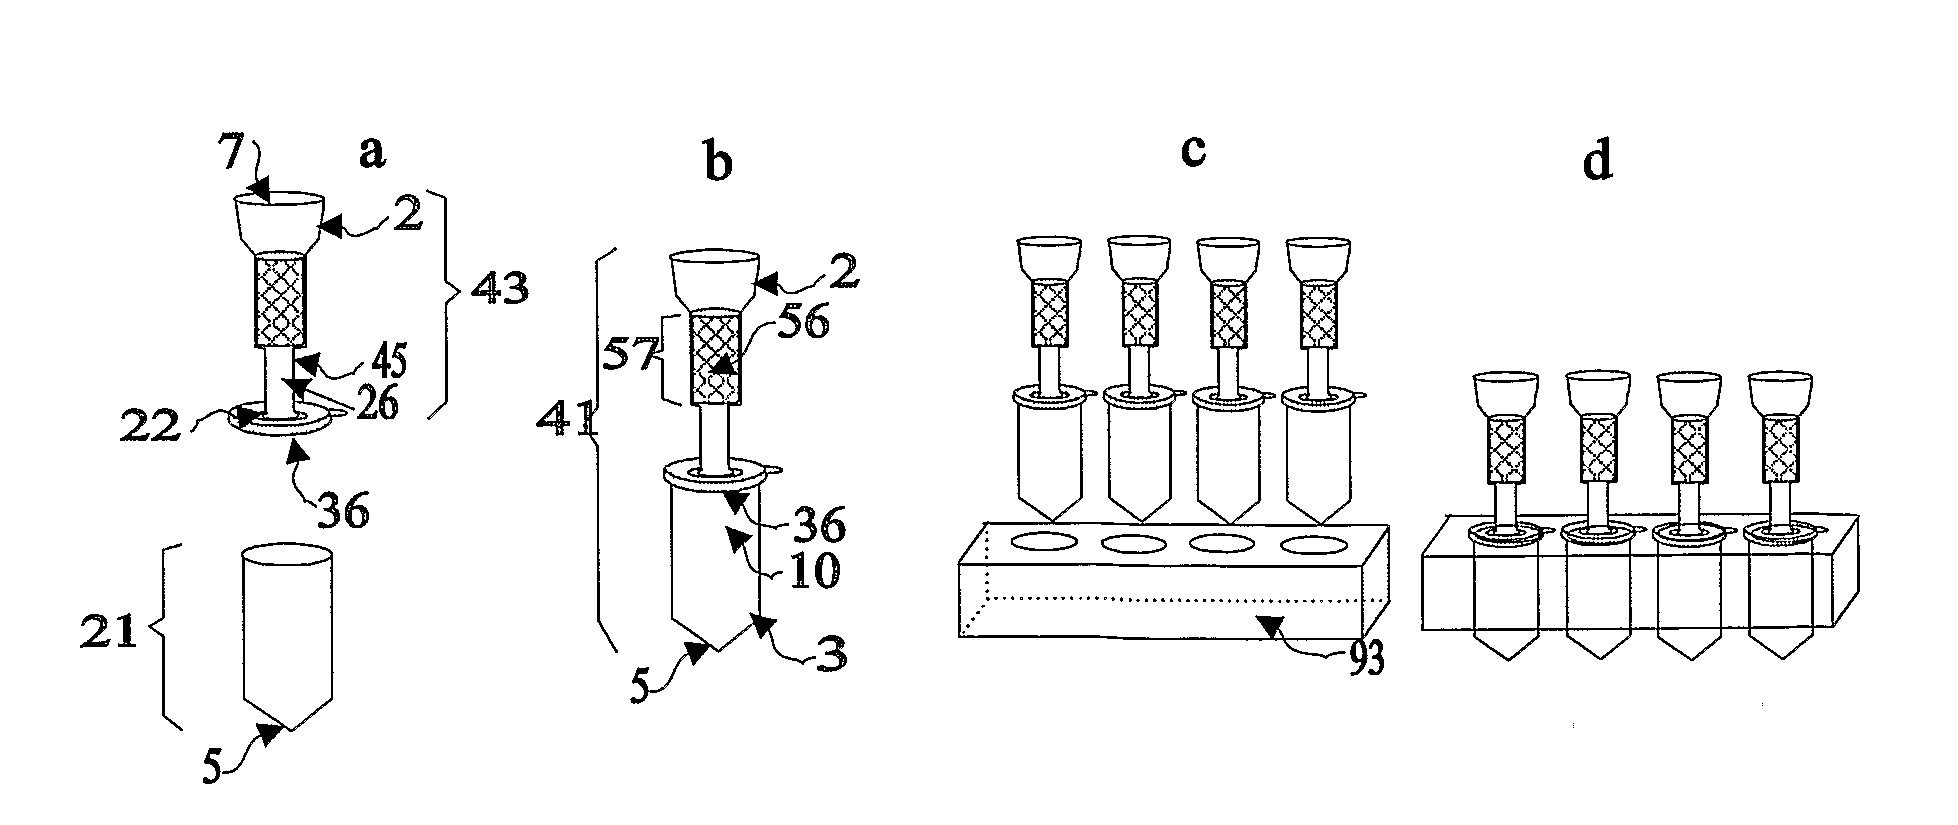 Bidirectional Transfer of an Aliquot of Fluid Between Compartments